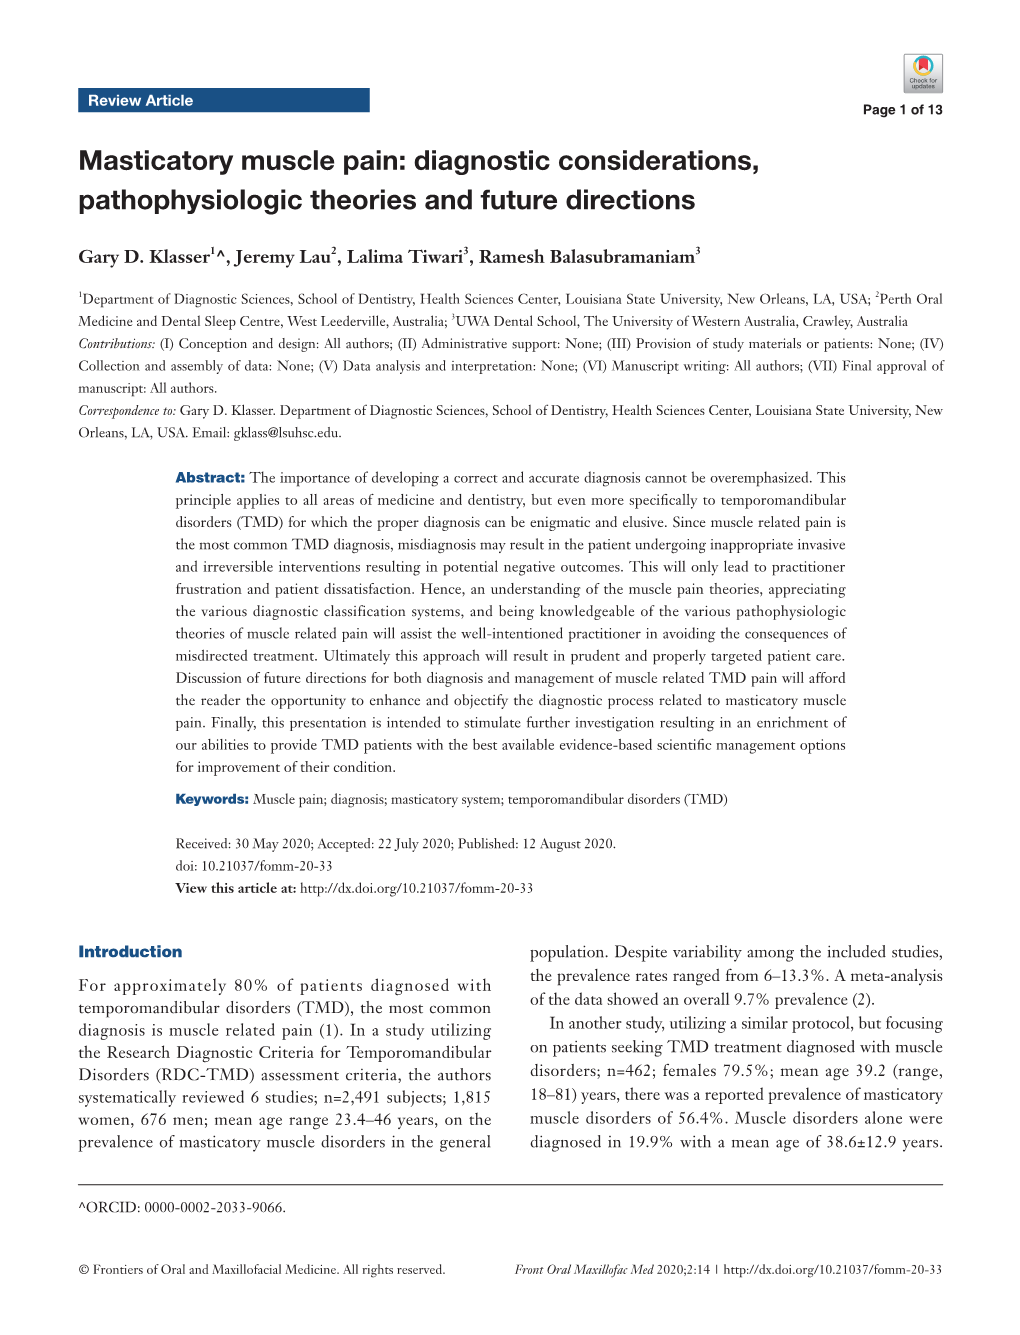 Masticatory Muscle Pain: Diagnostic Considerations, Pathophysiologic Theories and Future Directions